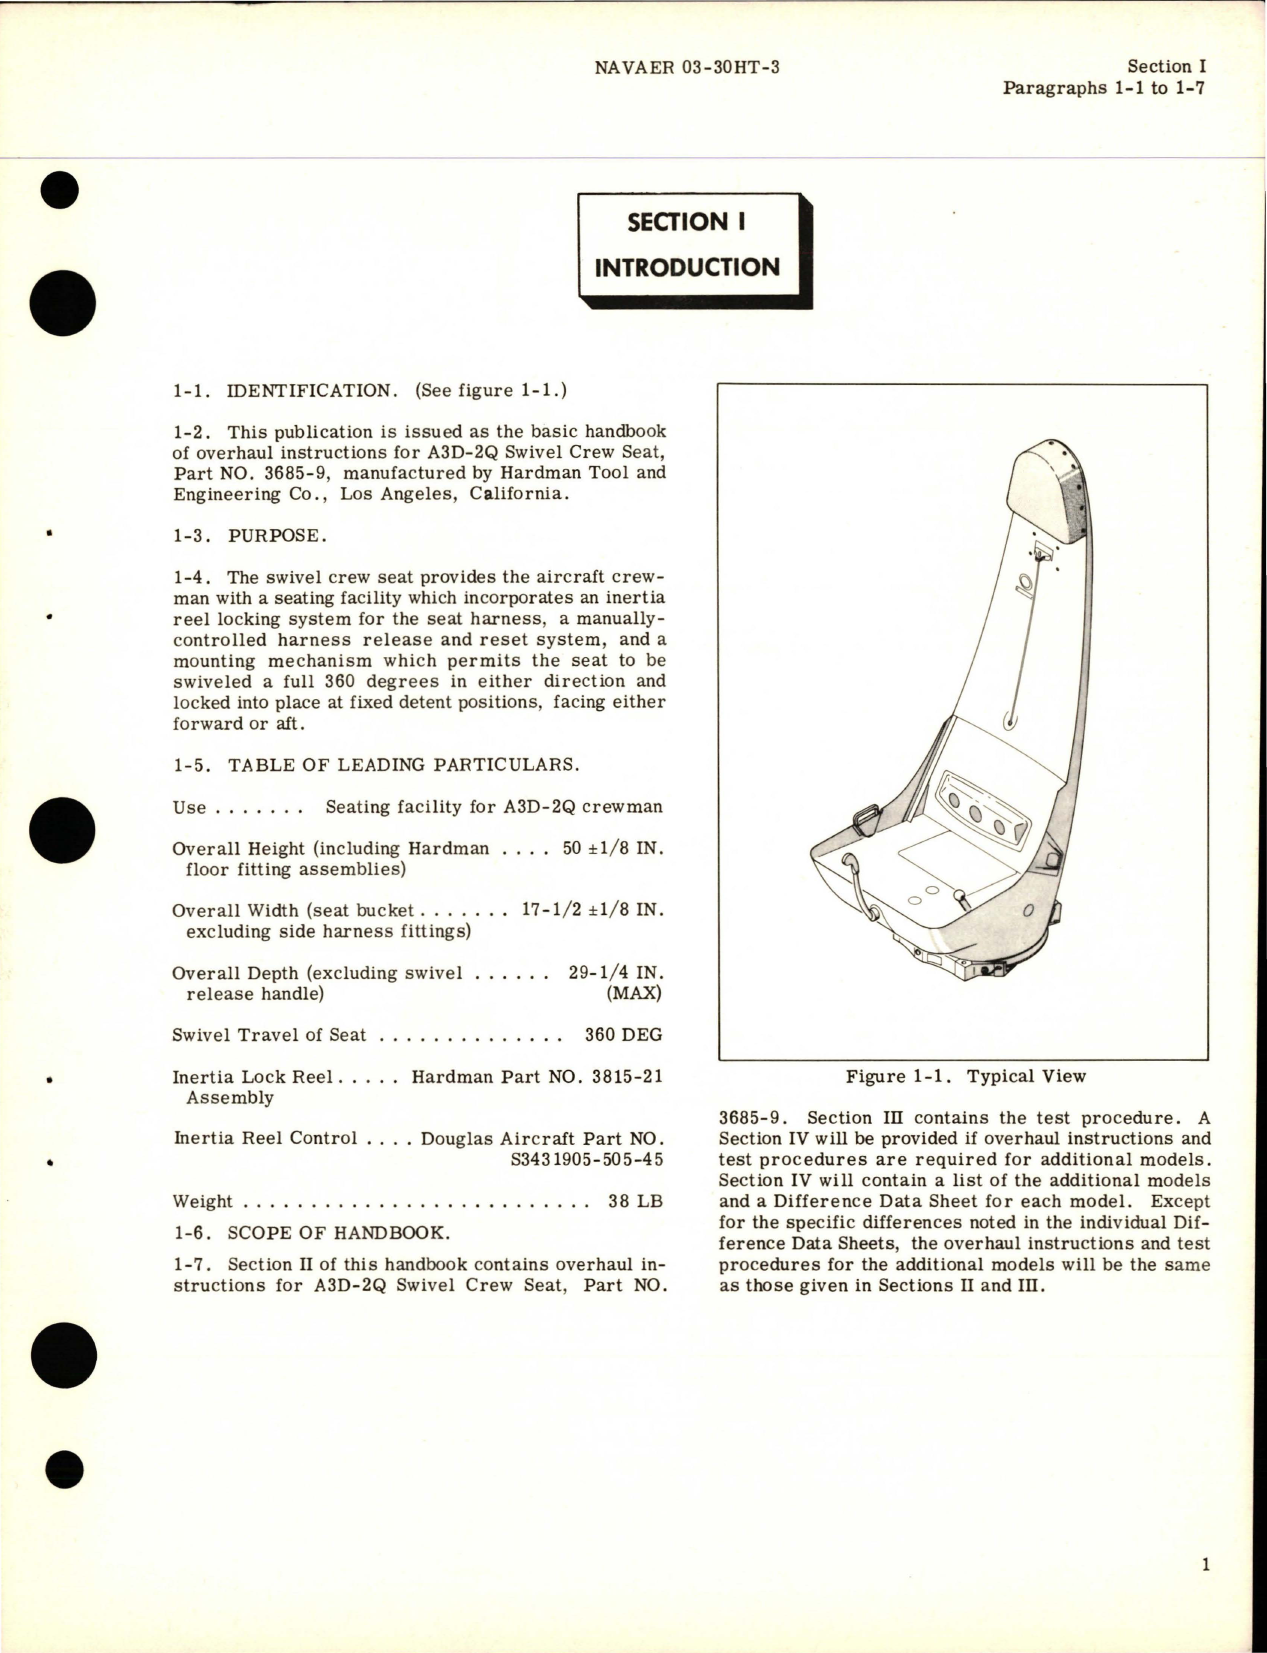 Sample page 5 from AirCorps Library document: Overhaul Instructions for A3D-2Q Swivel Crew Seat - Part 3685-9